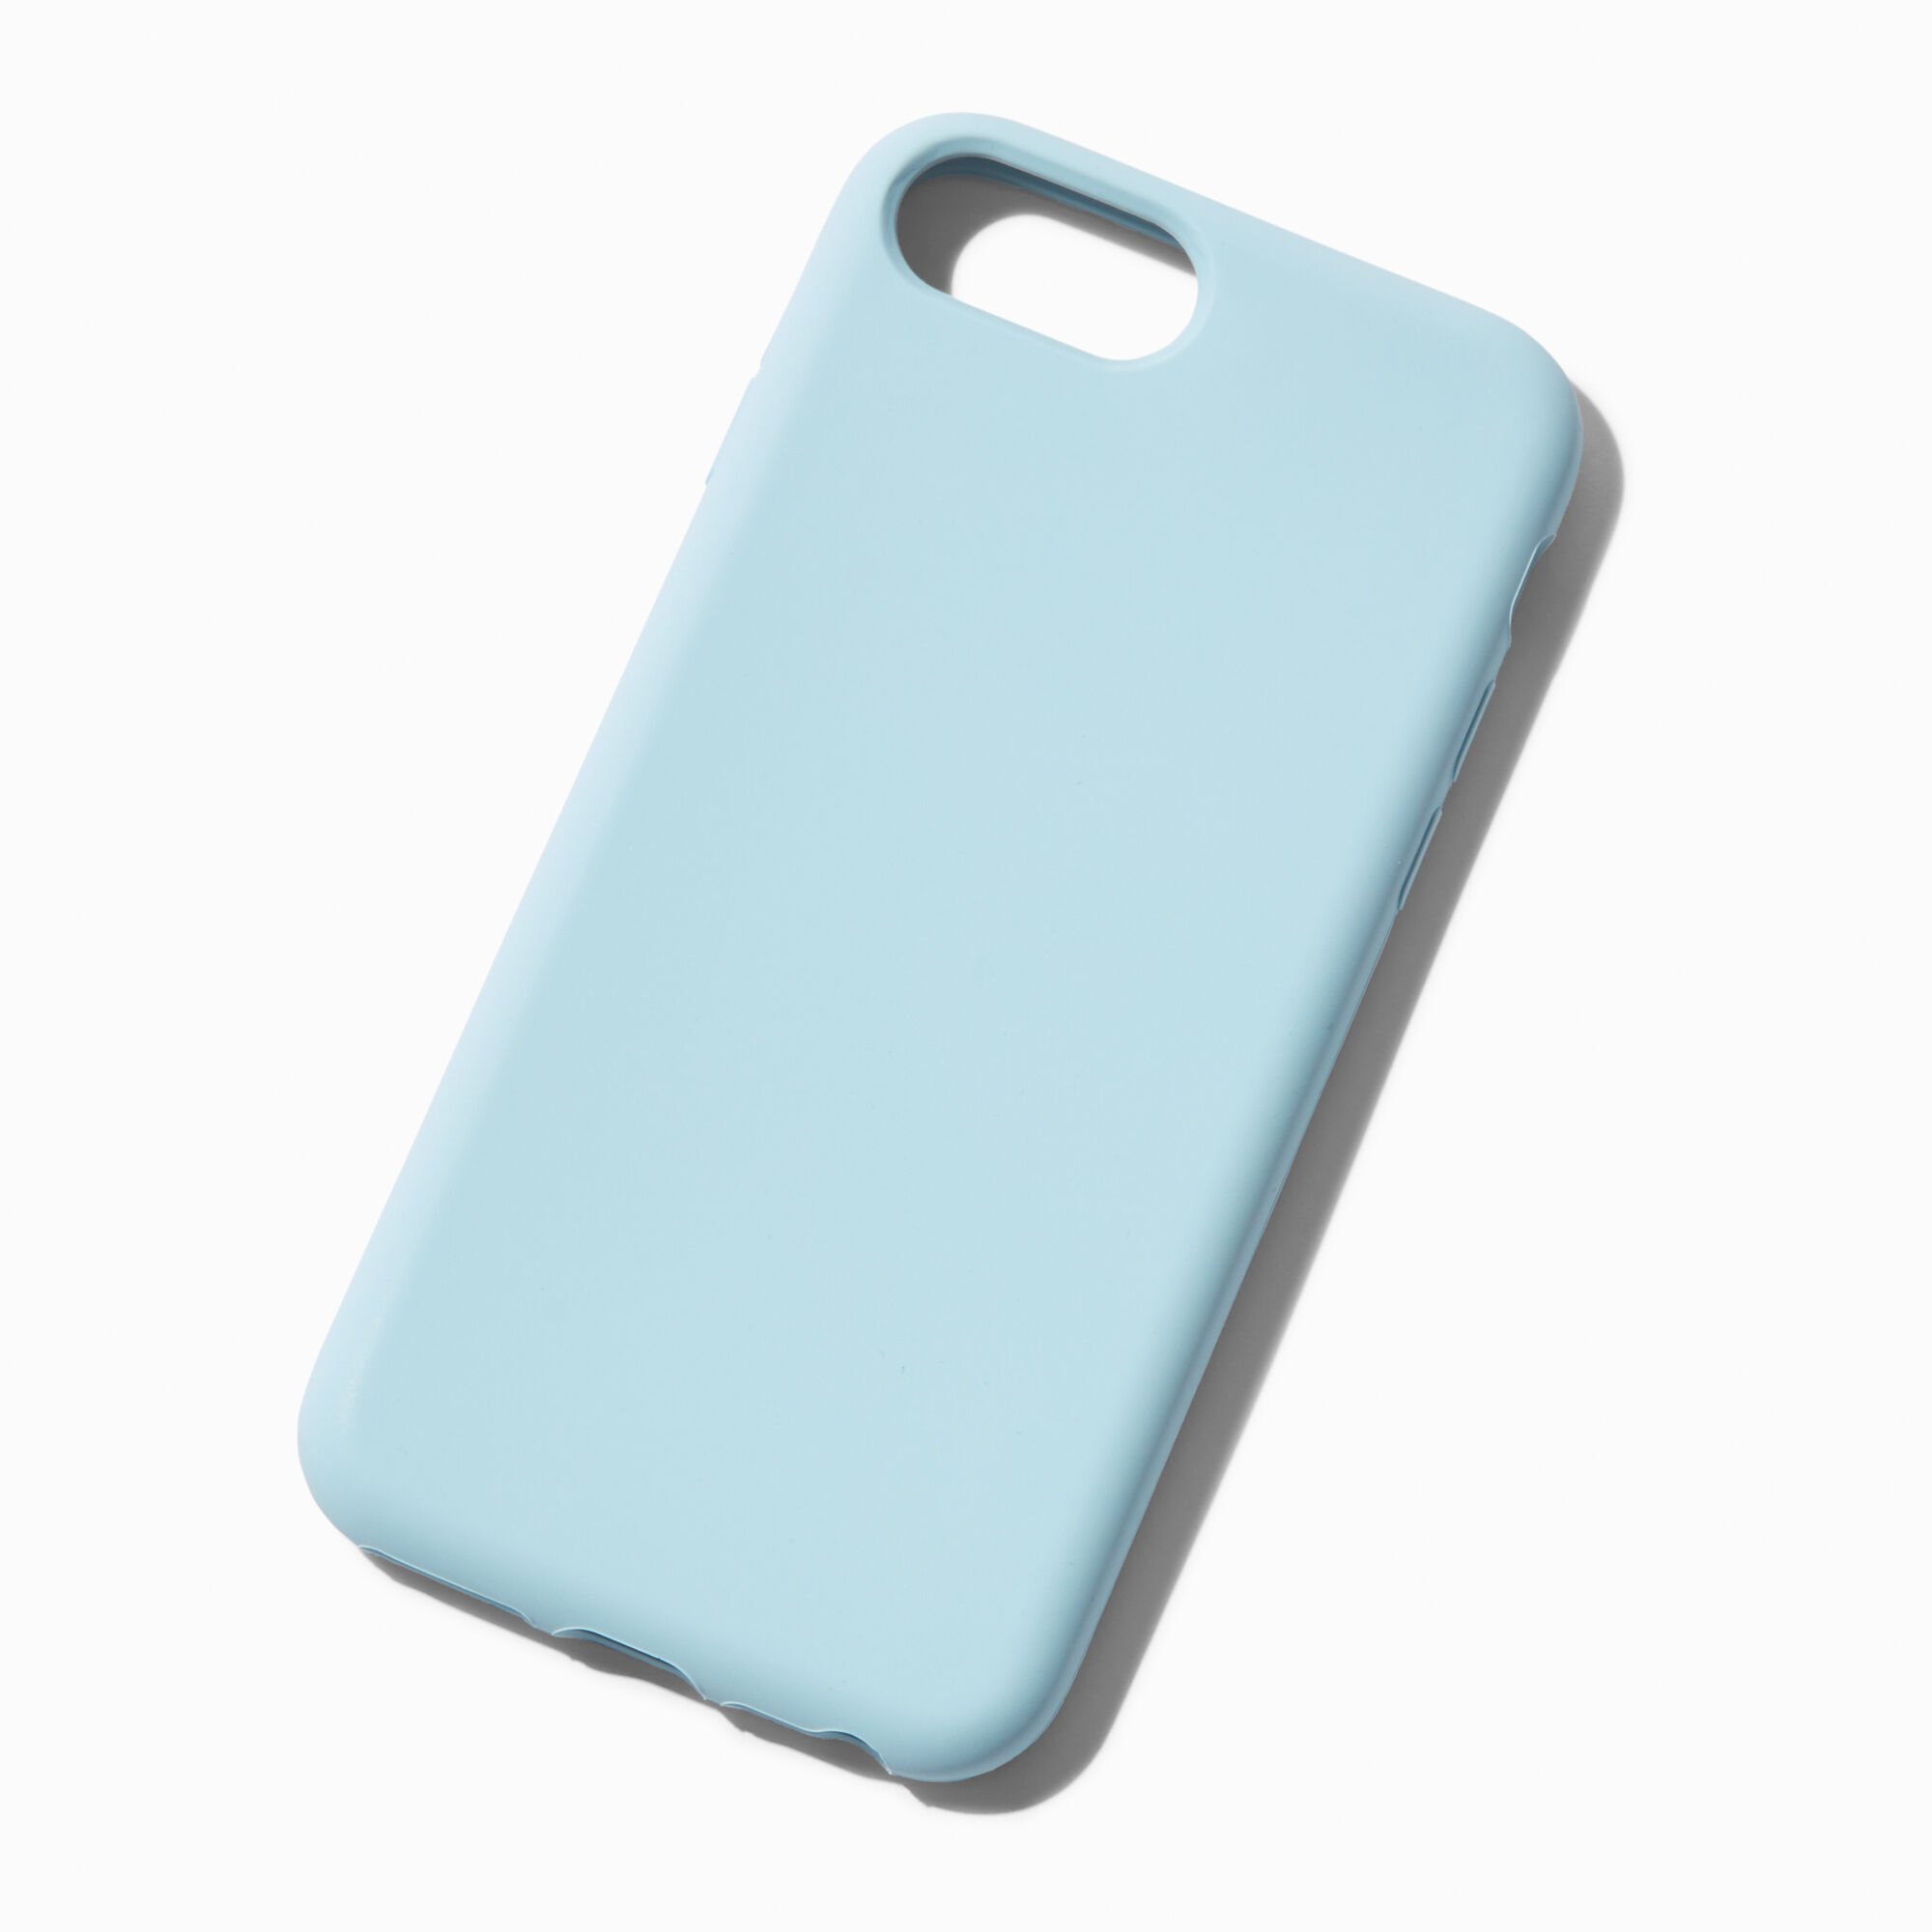 View Claires Solid Silicone Phone Case Fits Iphone 678se Baby Blue information